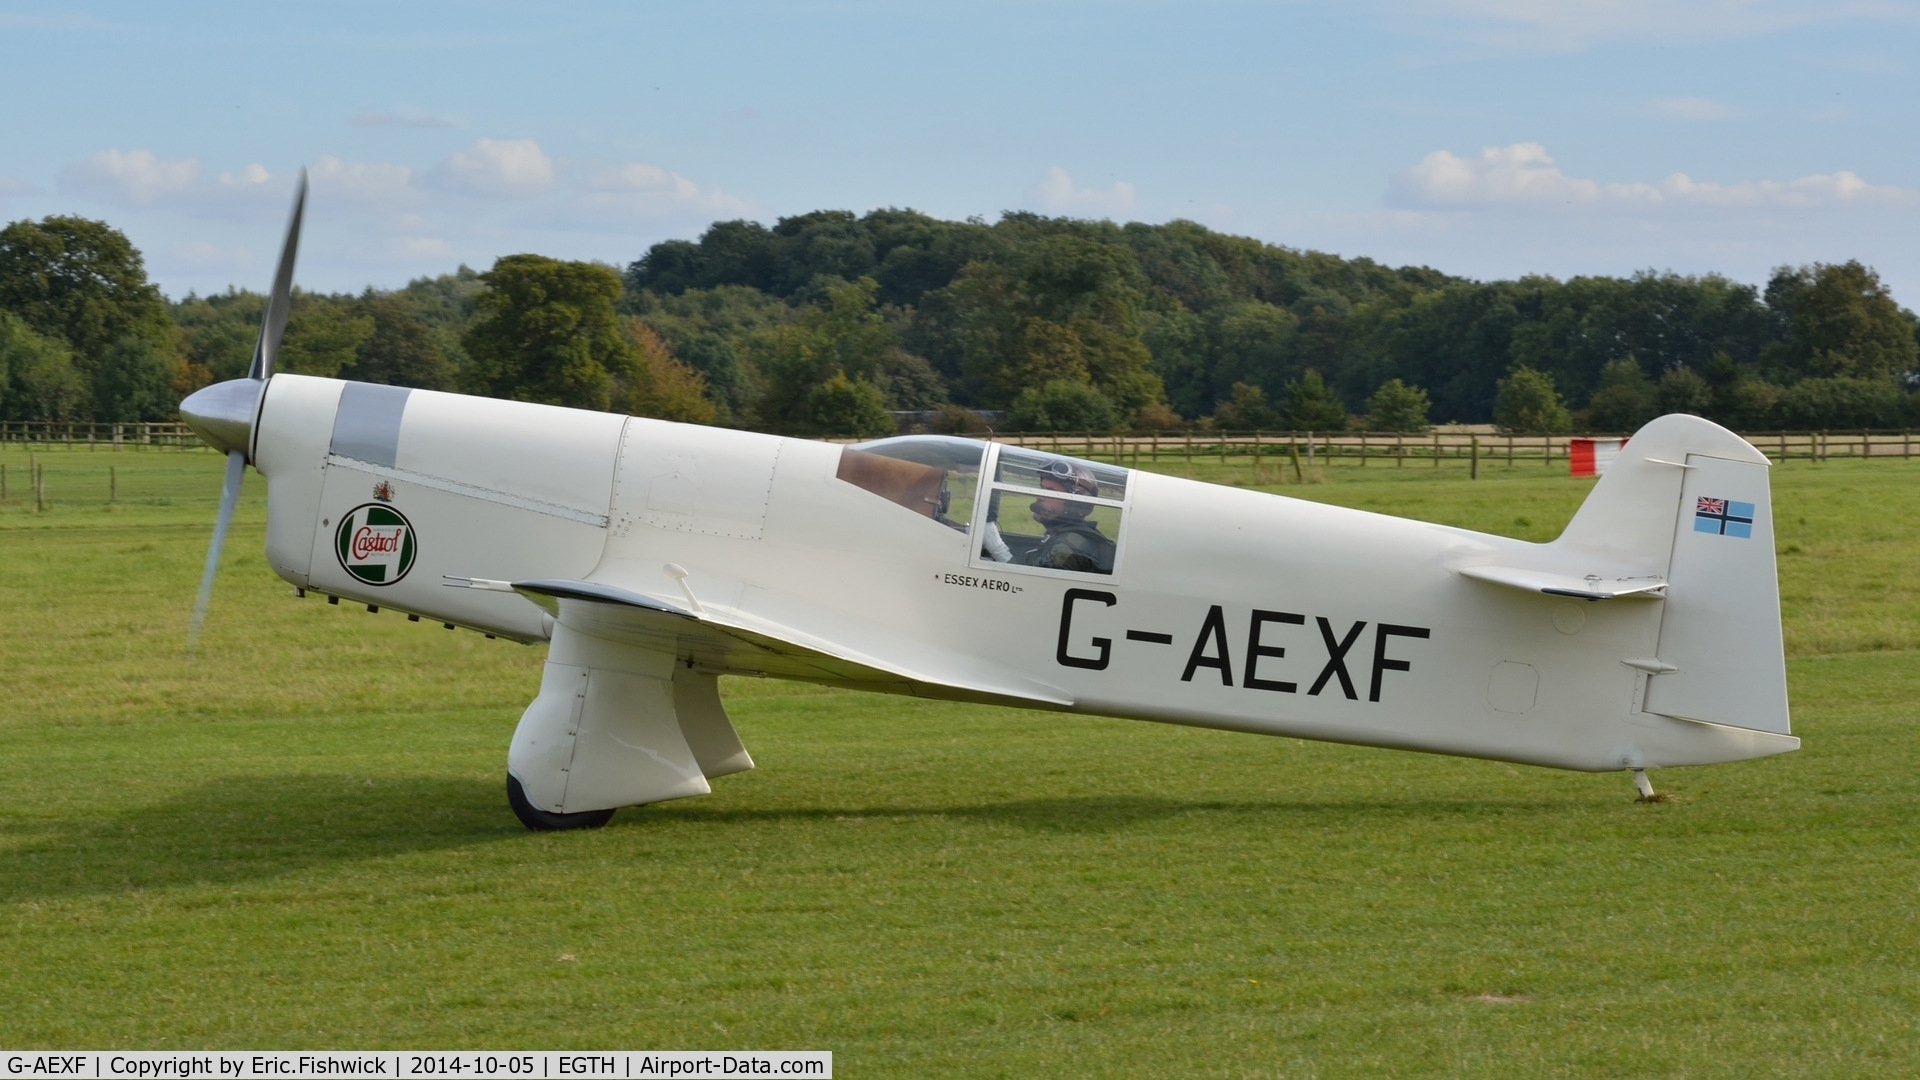 G-AEXF, 1936 Percival E-2H Mew Gull C/N E22, 1. G-AEXF at the rousing season finale Race Day Air Show at Shuttleworth, Oct. 2014.